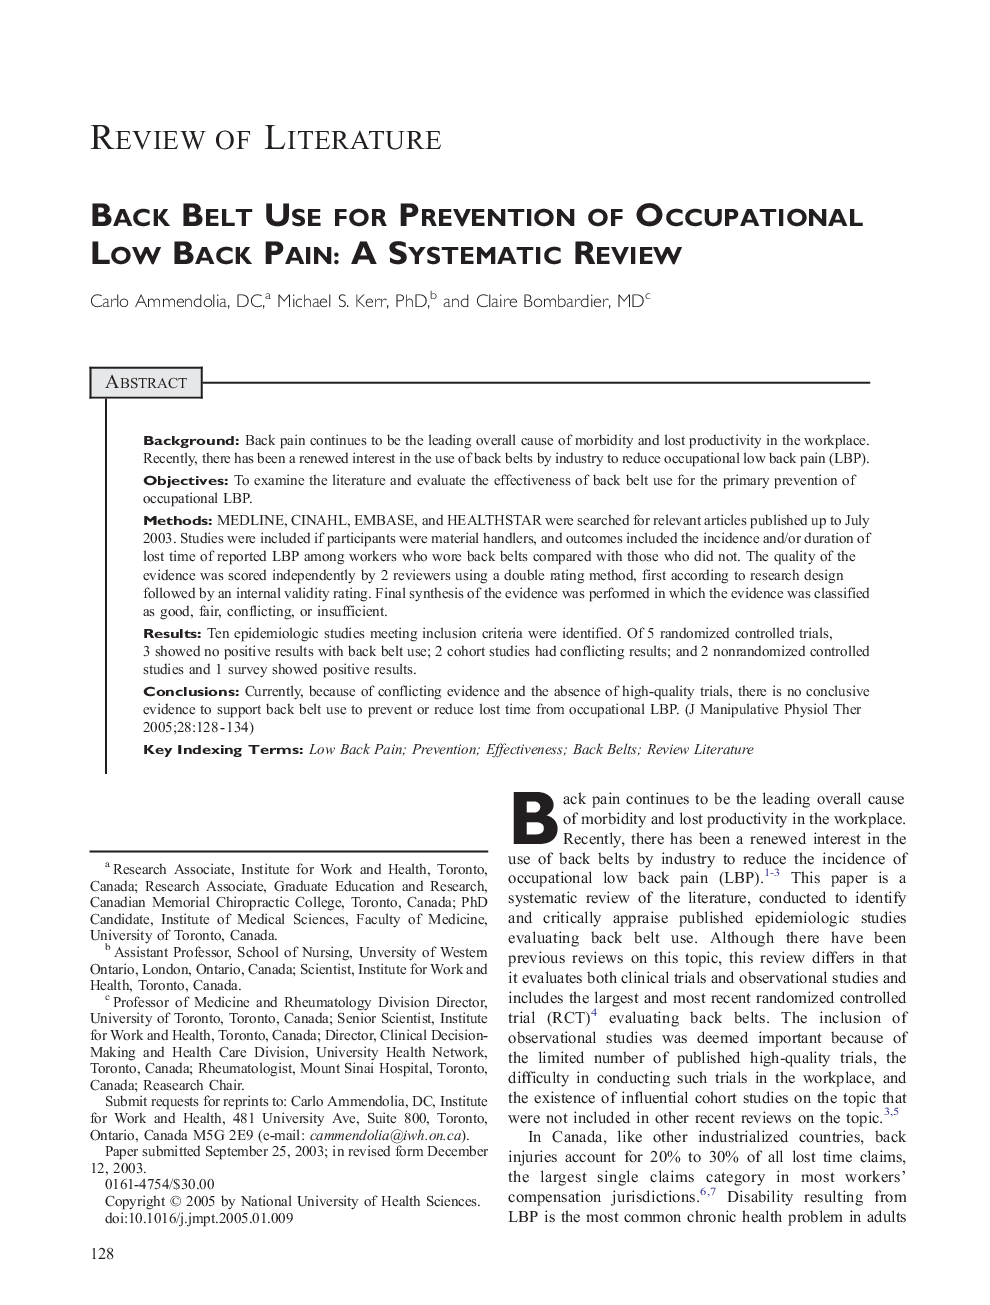 Back Belt Use for Prevention of Occupational Low Back Pain: A Systematic Review